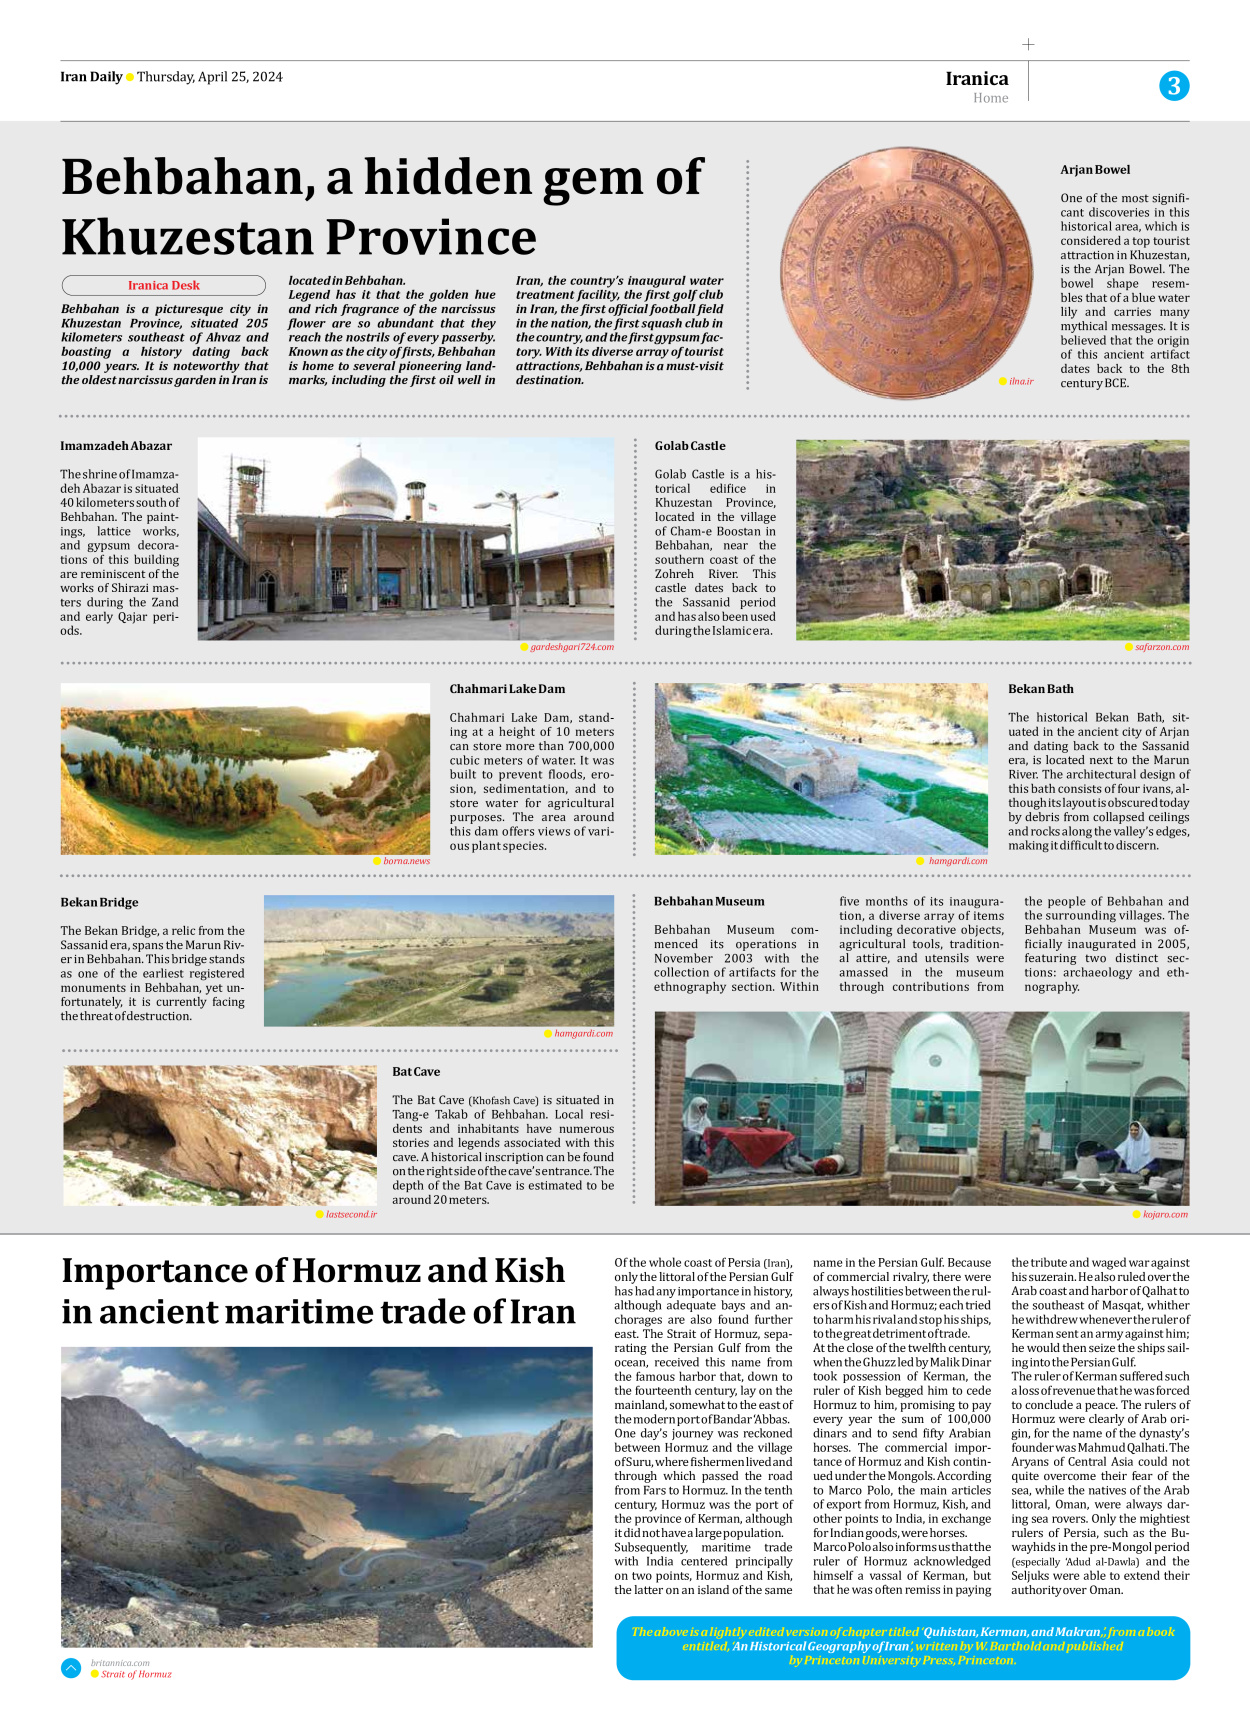 Iran Daily - Number Seven Thousand Five Hundred and Forty Two - 25 April 2024 - Page 3